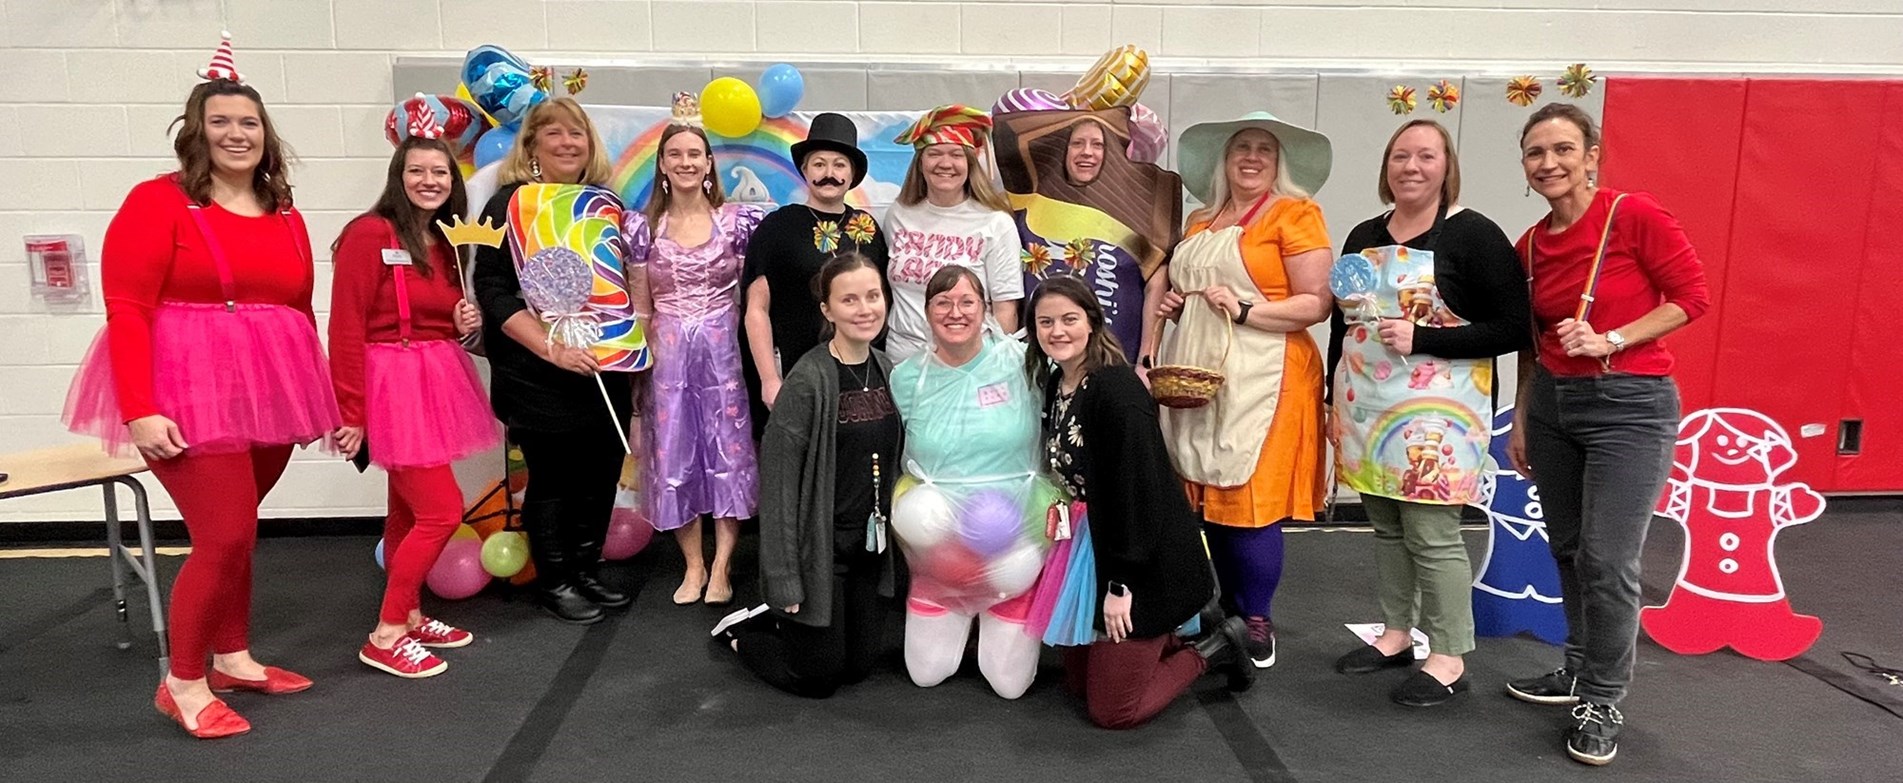 Teachers dressed in Candyland Game Costumes line up in gym.